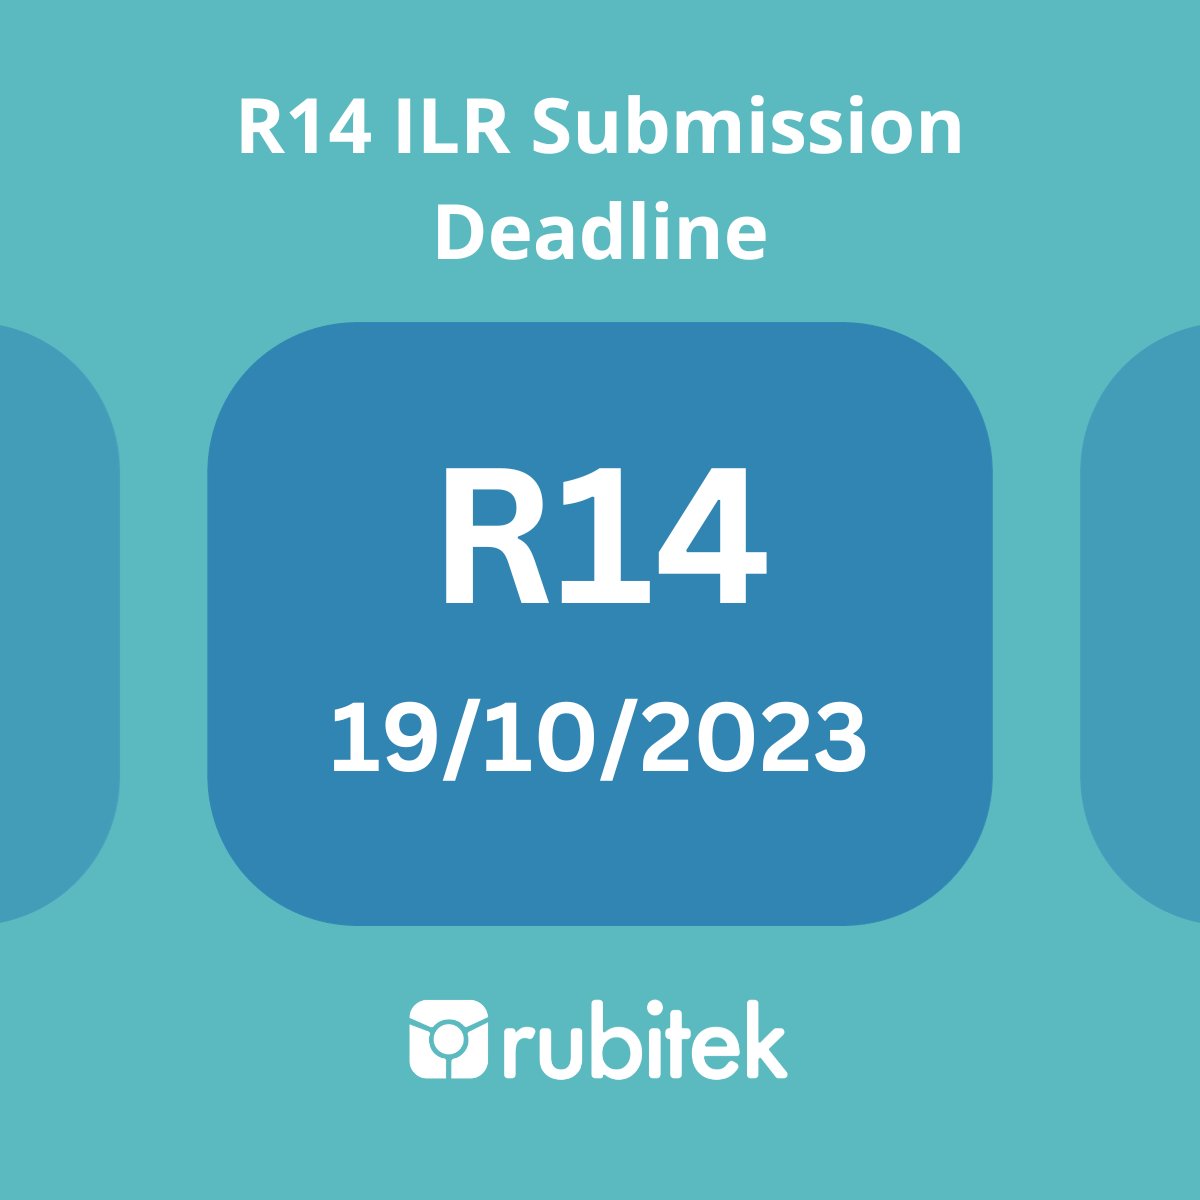 📢 Training Providers - don't Miss the R14 Submission Deadline this Thursday, 19th October!🚨

We understand that ILR submissions can be daunting - that's why Rubitek produces an accurate ILR to safeguard your finances, with only the click of a button!🌟 #TrainingProviders #R14